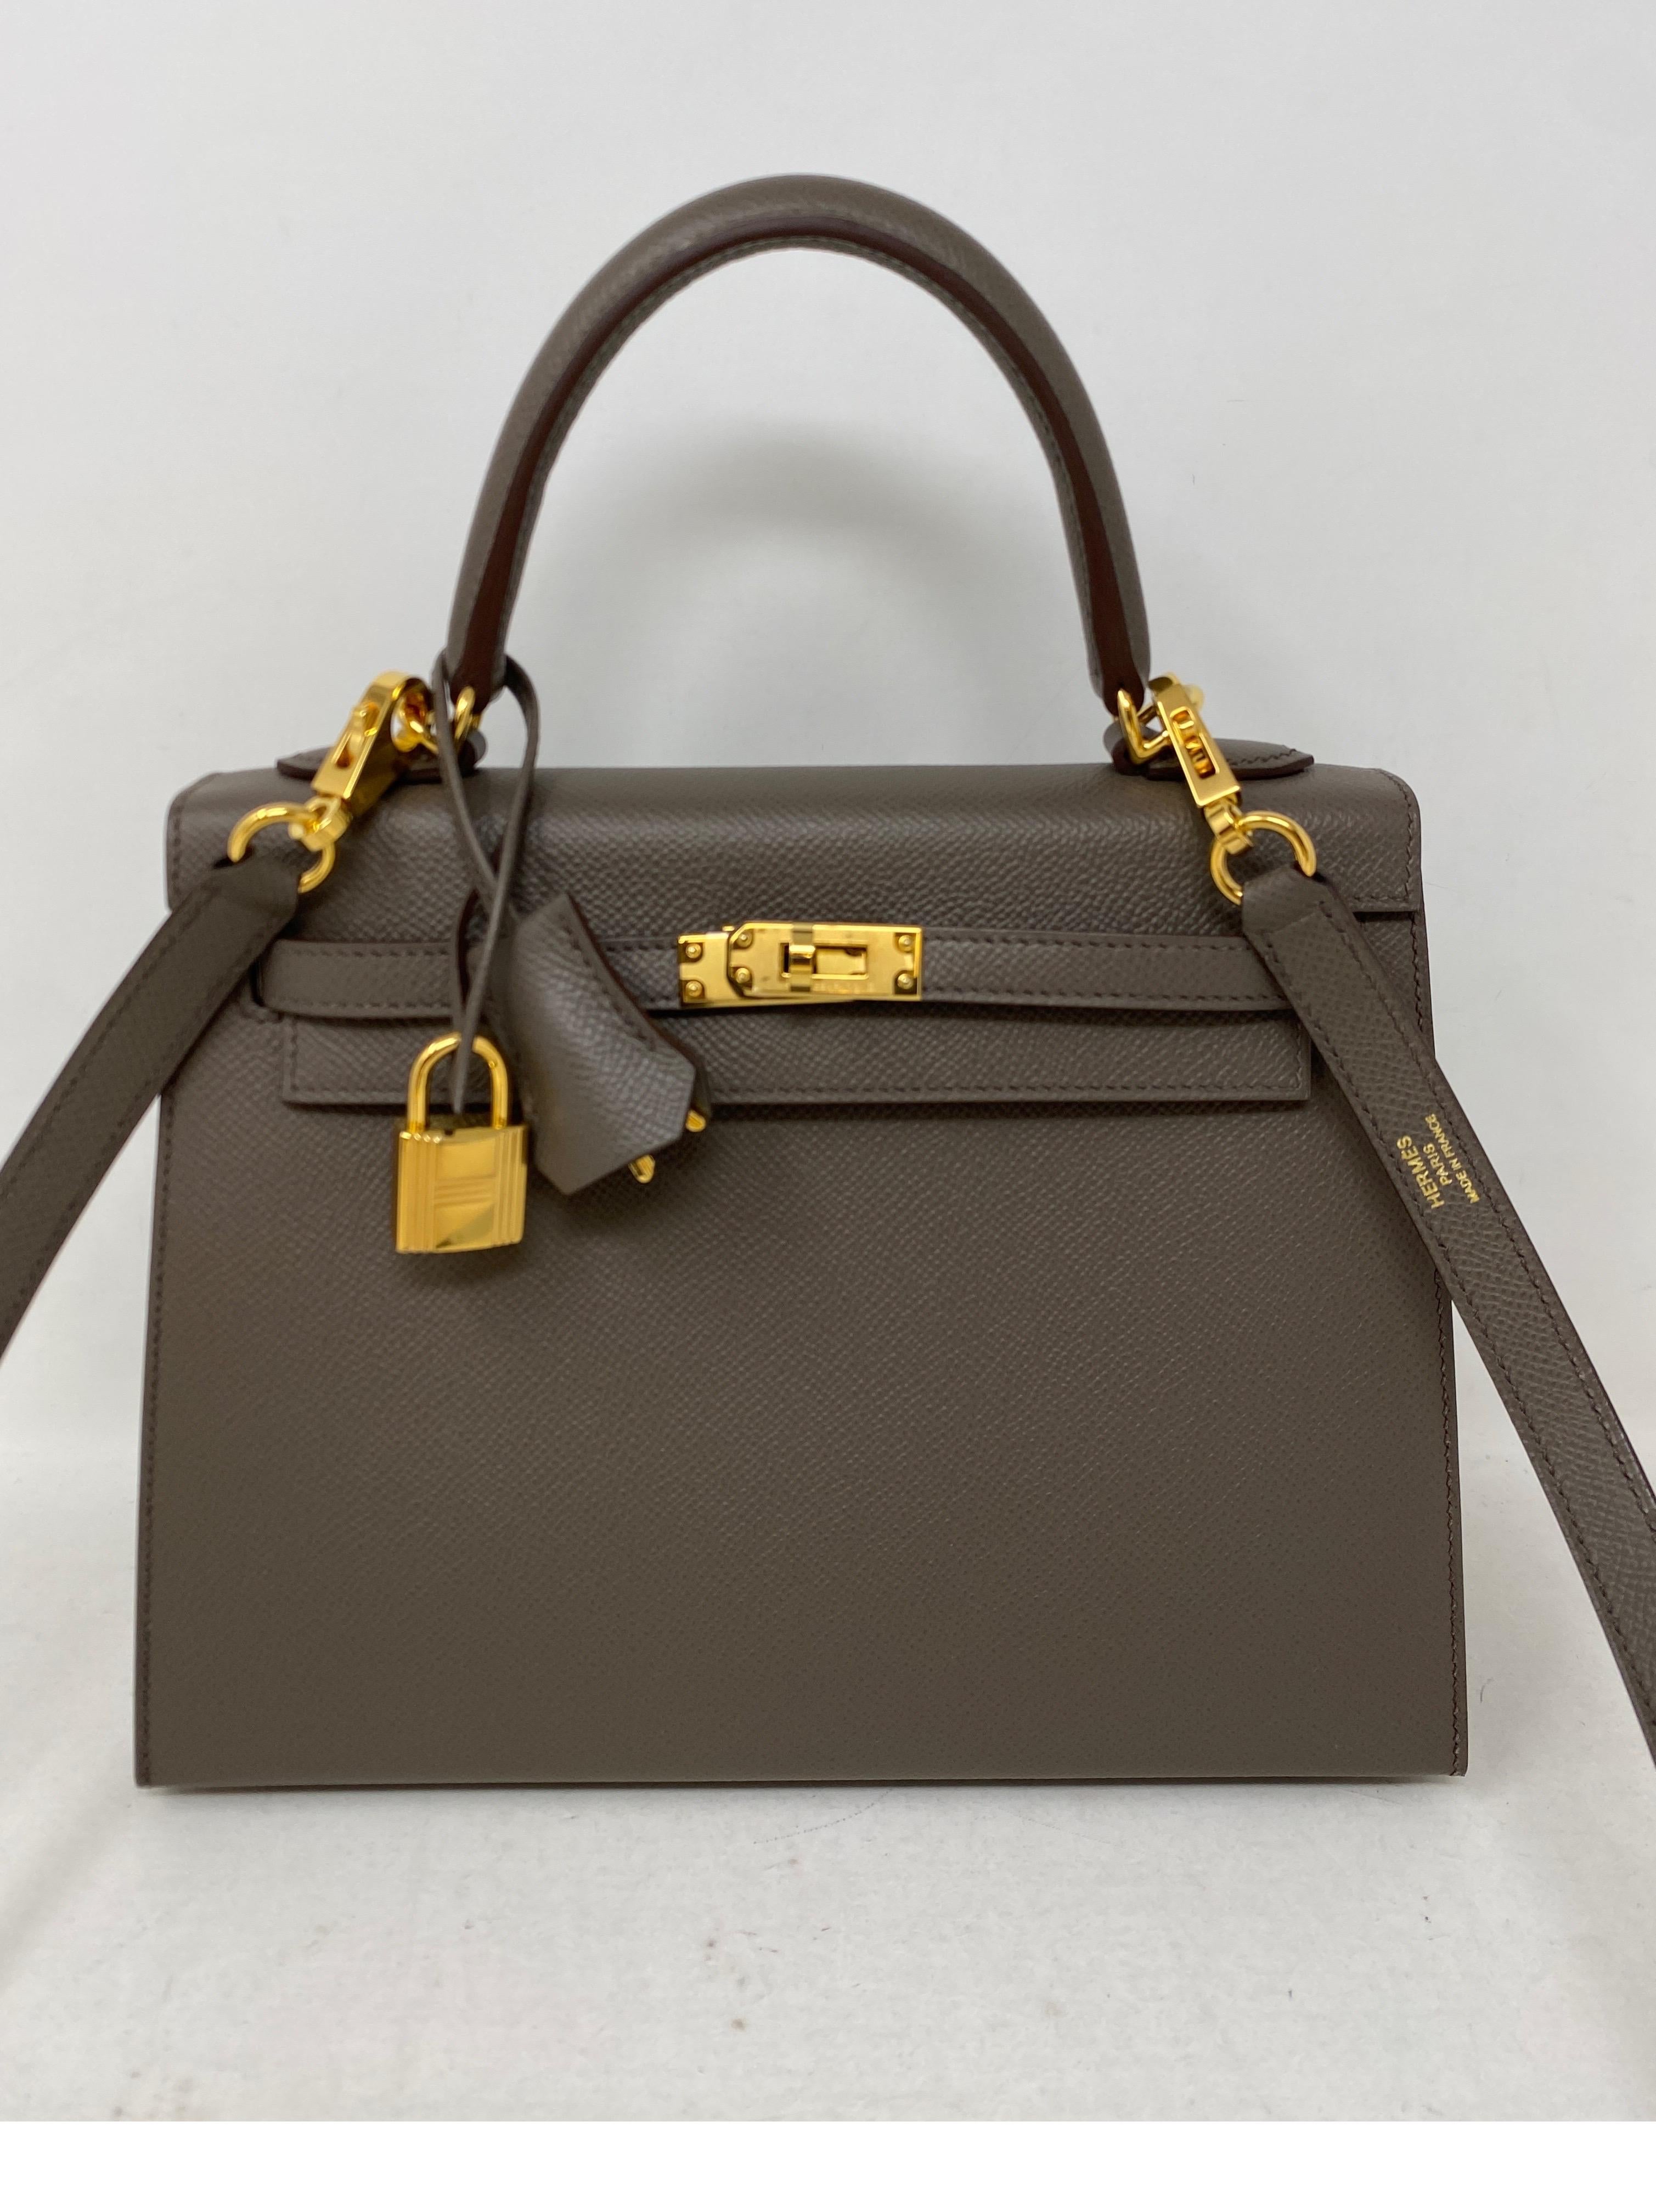 Hermes Kelly Etain 25 Bag. Gold hardware. Epsom leather sellier. The most wanted size and color. New Kelly bag. Small size Kelly is very hard to get. Includes clochette, lock, keys, and dust bag. Guaranteed authentic. 